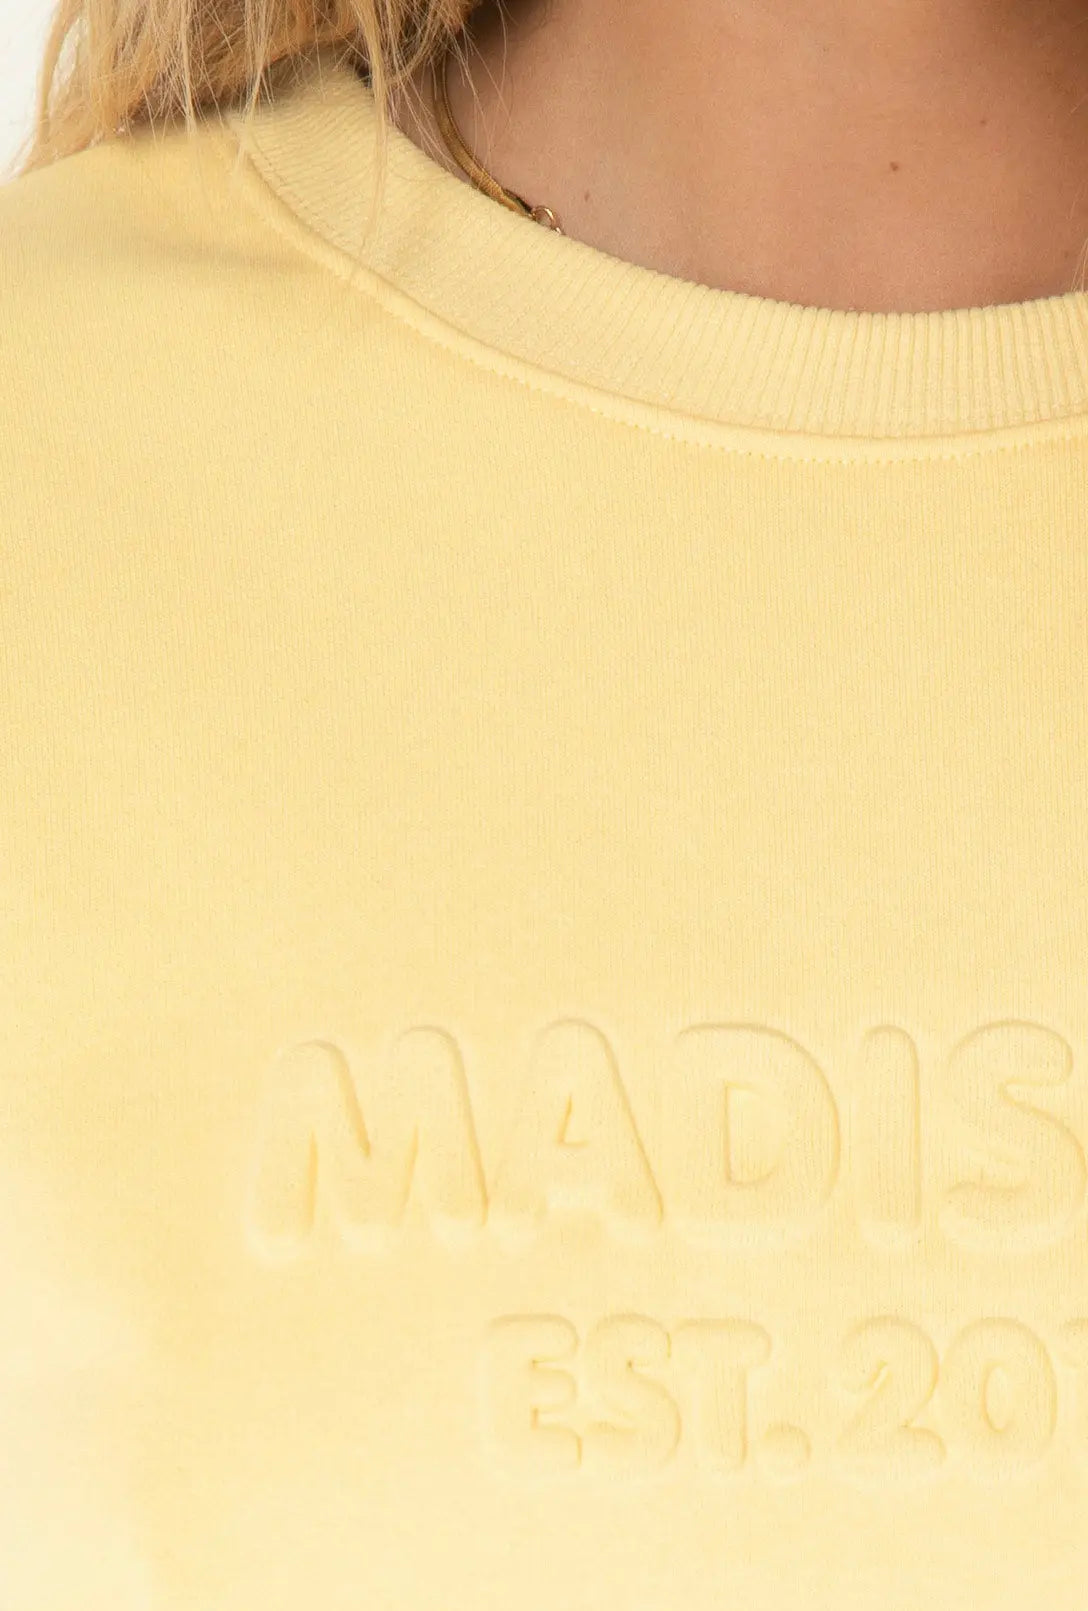 EST 2010 EMBOSSED SWEATER | BUTTER MADISON THE LABEL